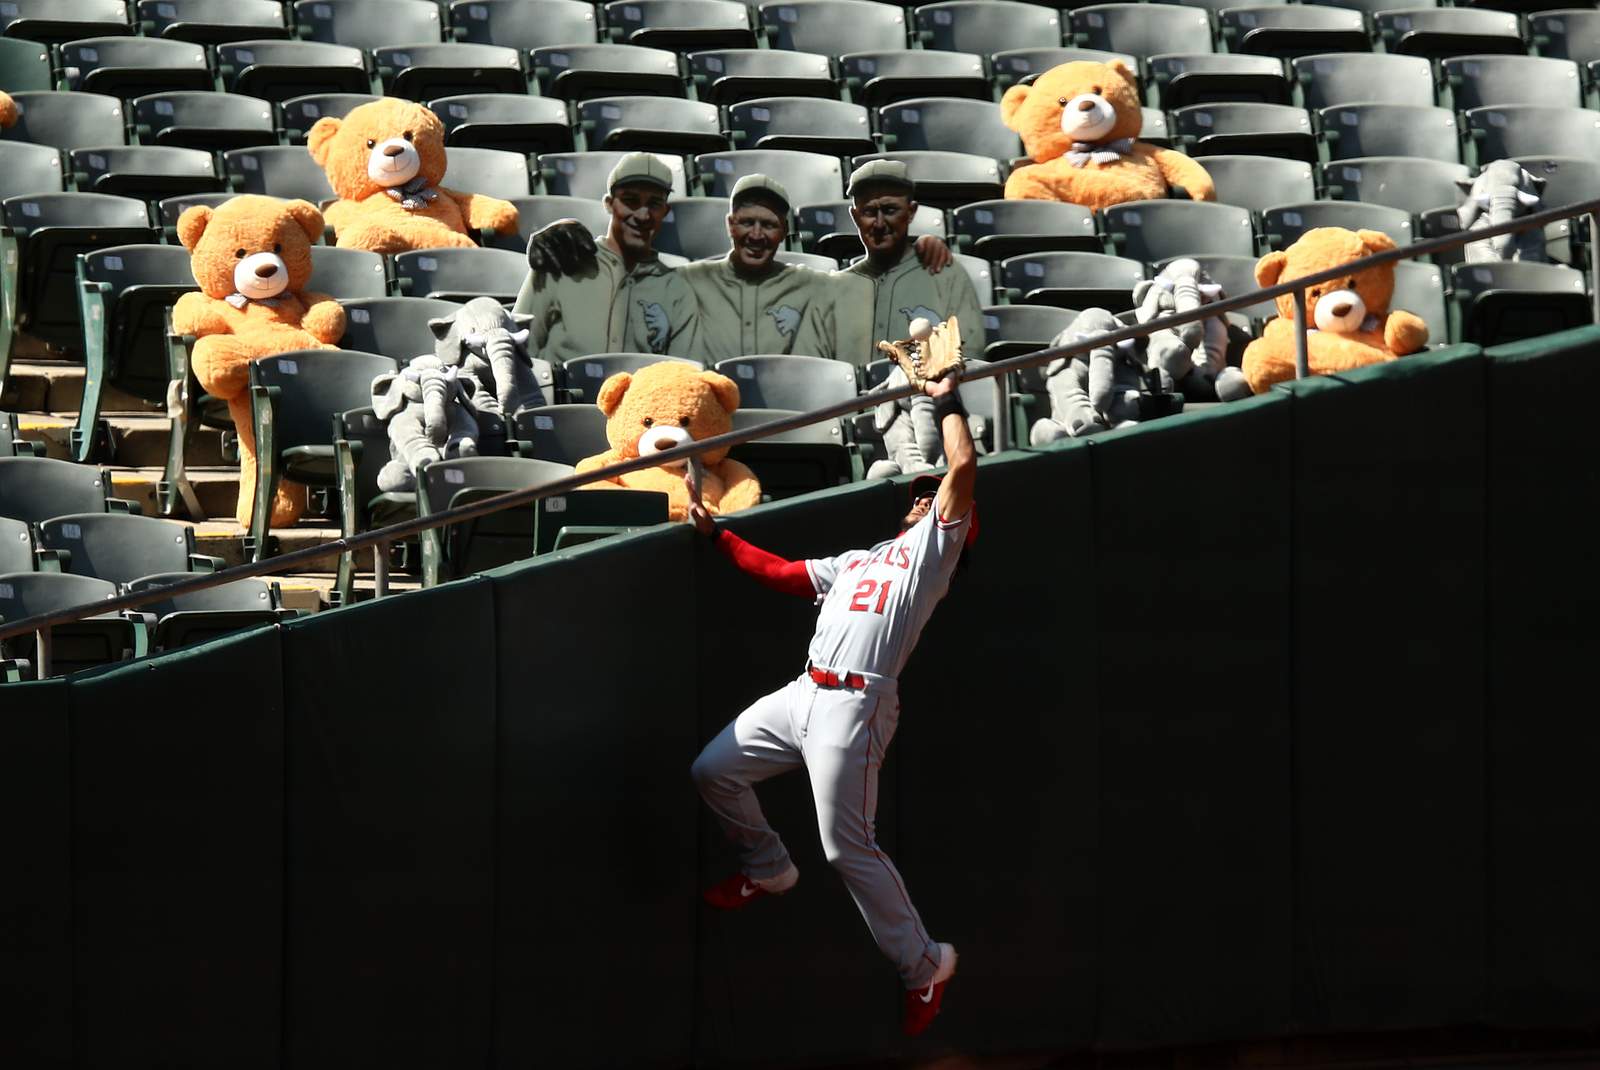 Cardboard fans? Masks? MLB is back, but it doesn’t look real -- these photos might weird you out